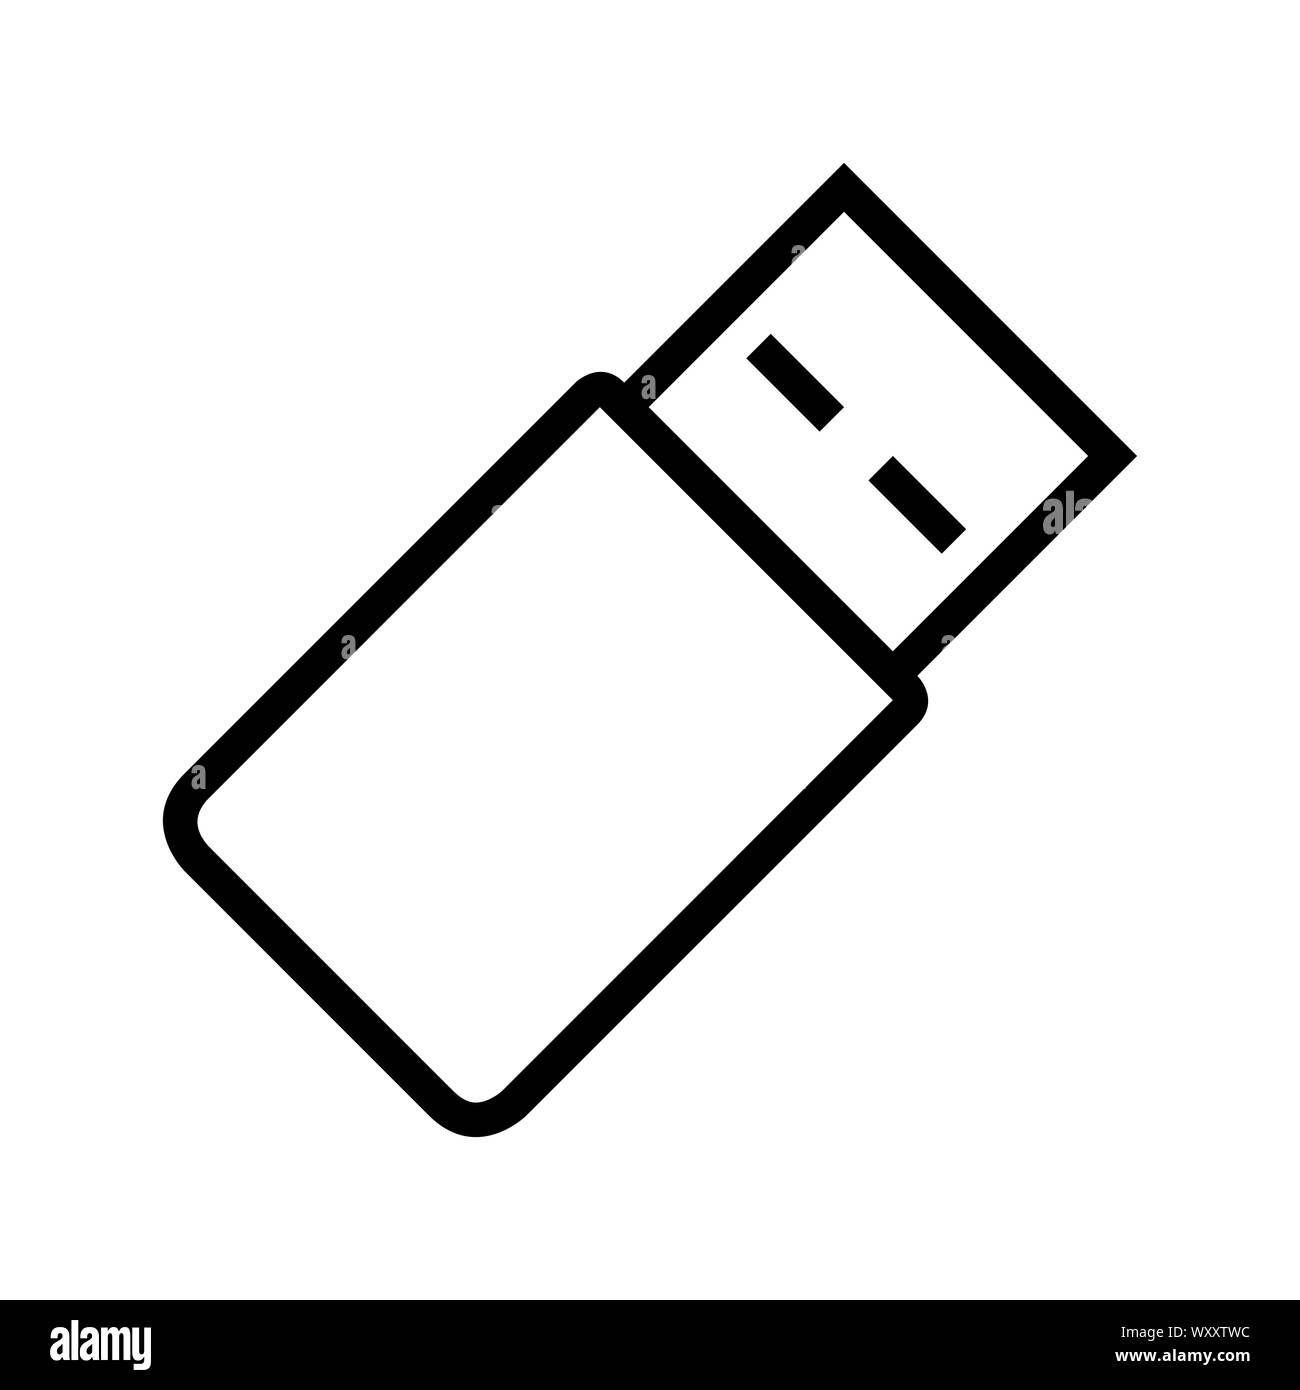 USB flash drive or Pen drive icon vector illustration - Perfect for sign,symbol,icon,logo etc. Stock Photo